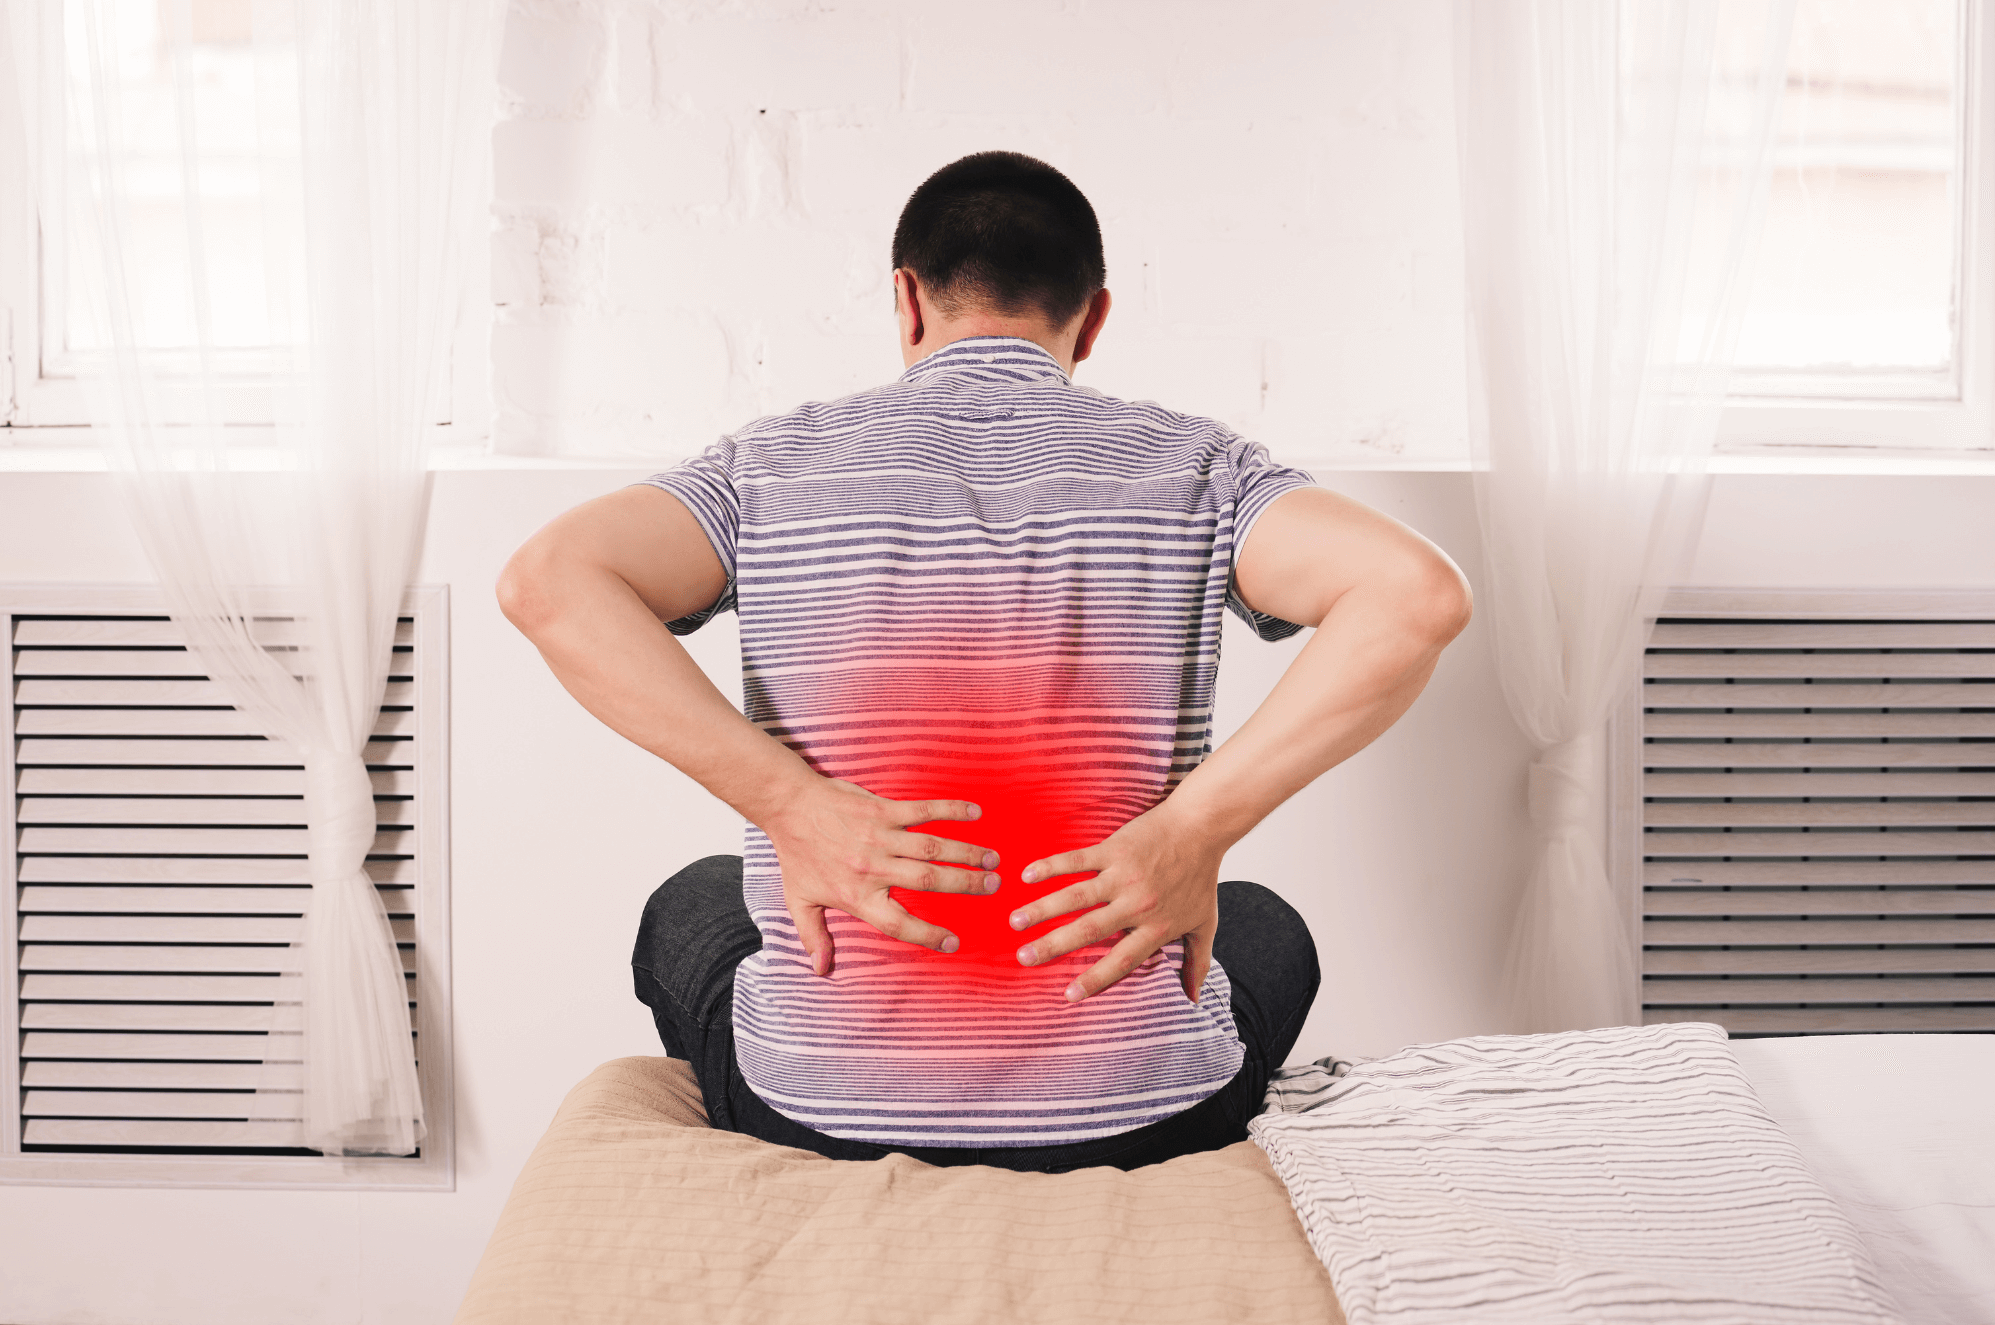 https://spinept.com/wp-content/uploads/2023/03/Man-Suffering-With-Back-And-Sciatica-Pain-At-Home.png